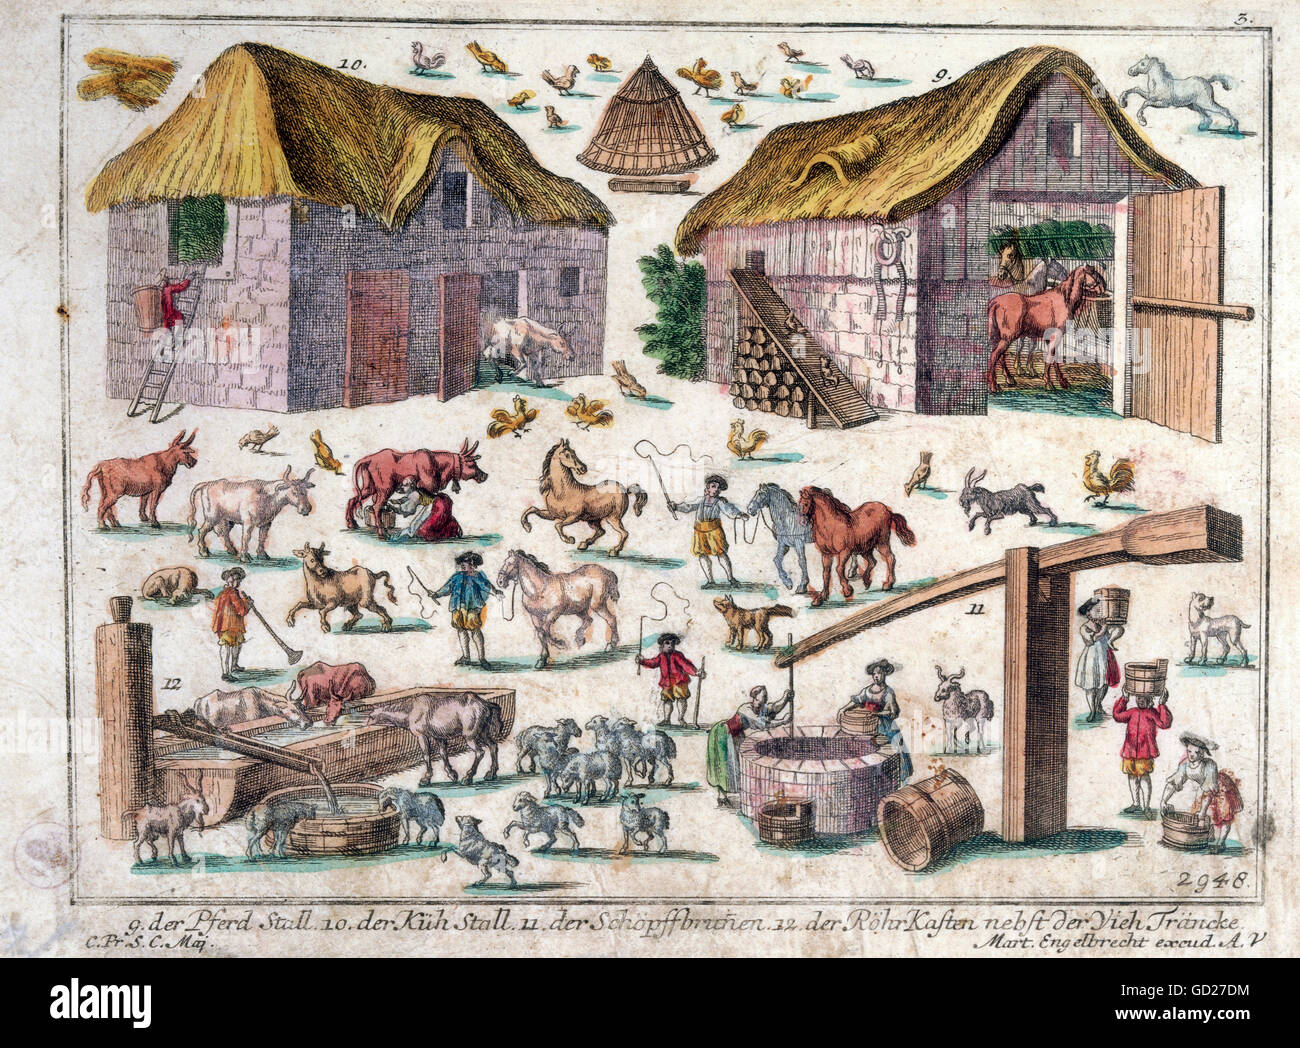 agriculture, horse stable, cowshed, draw well, watering place, series for children and Rococo broadsheets, coloured copper engraving by Martin Engelbrecht, Augsburg, Germany, 1st half of the 18th century, historic, historical, stable, horse stable, stables, horse stables, cowshed, cow barn, byre, cowhouse, livestock, live stock, cattle, farm, farms, country life, well, wells, animal, animals, barn, barns, Dutch barn, stable, barn, barnstable, stables, barns, barnstables, people, Artist's Copyright has not to be cleared Stock Photo